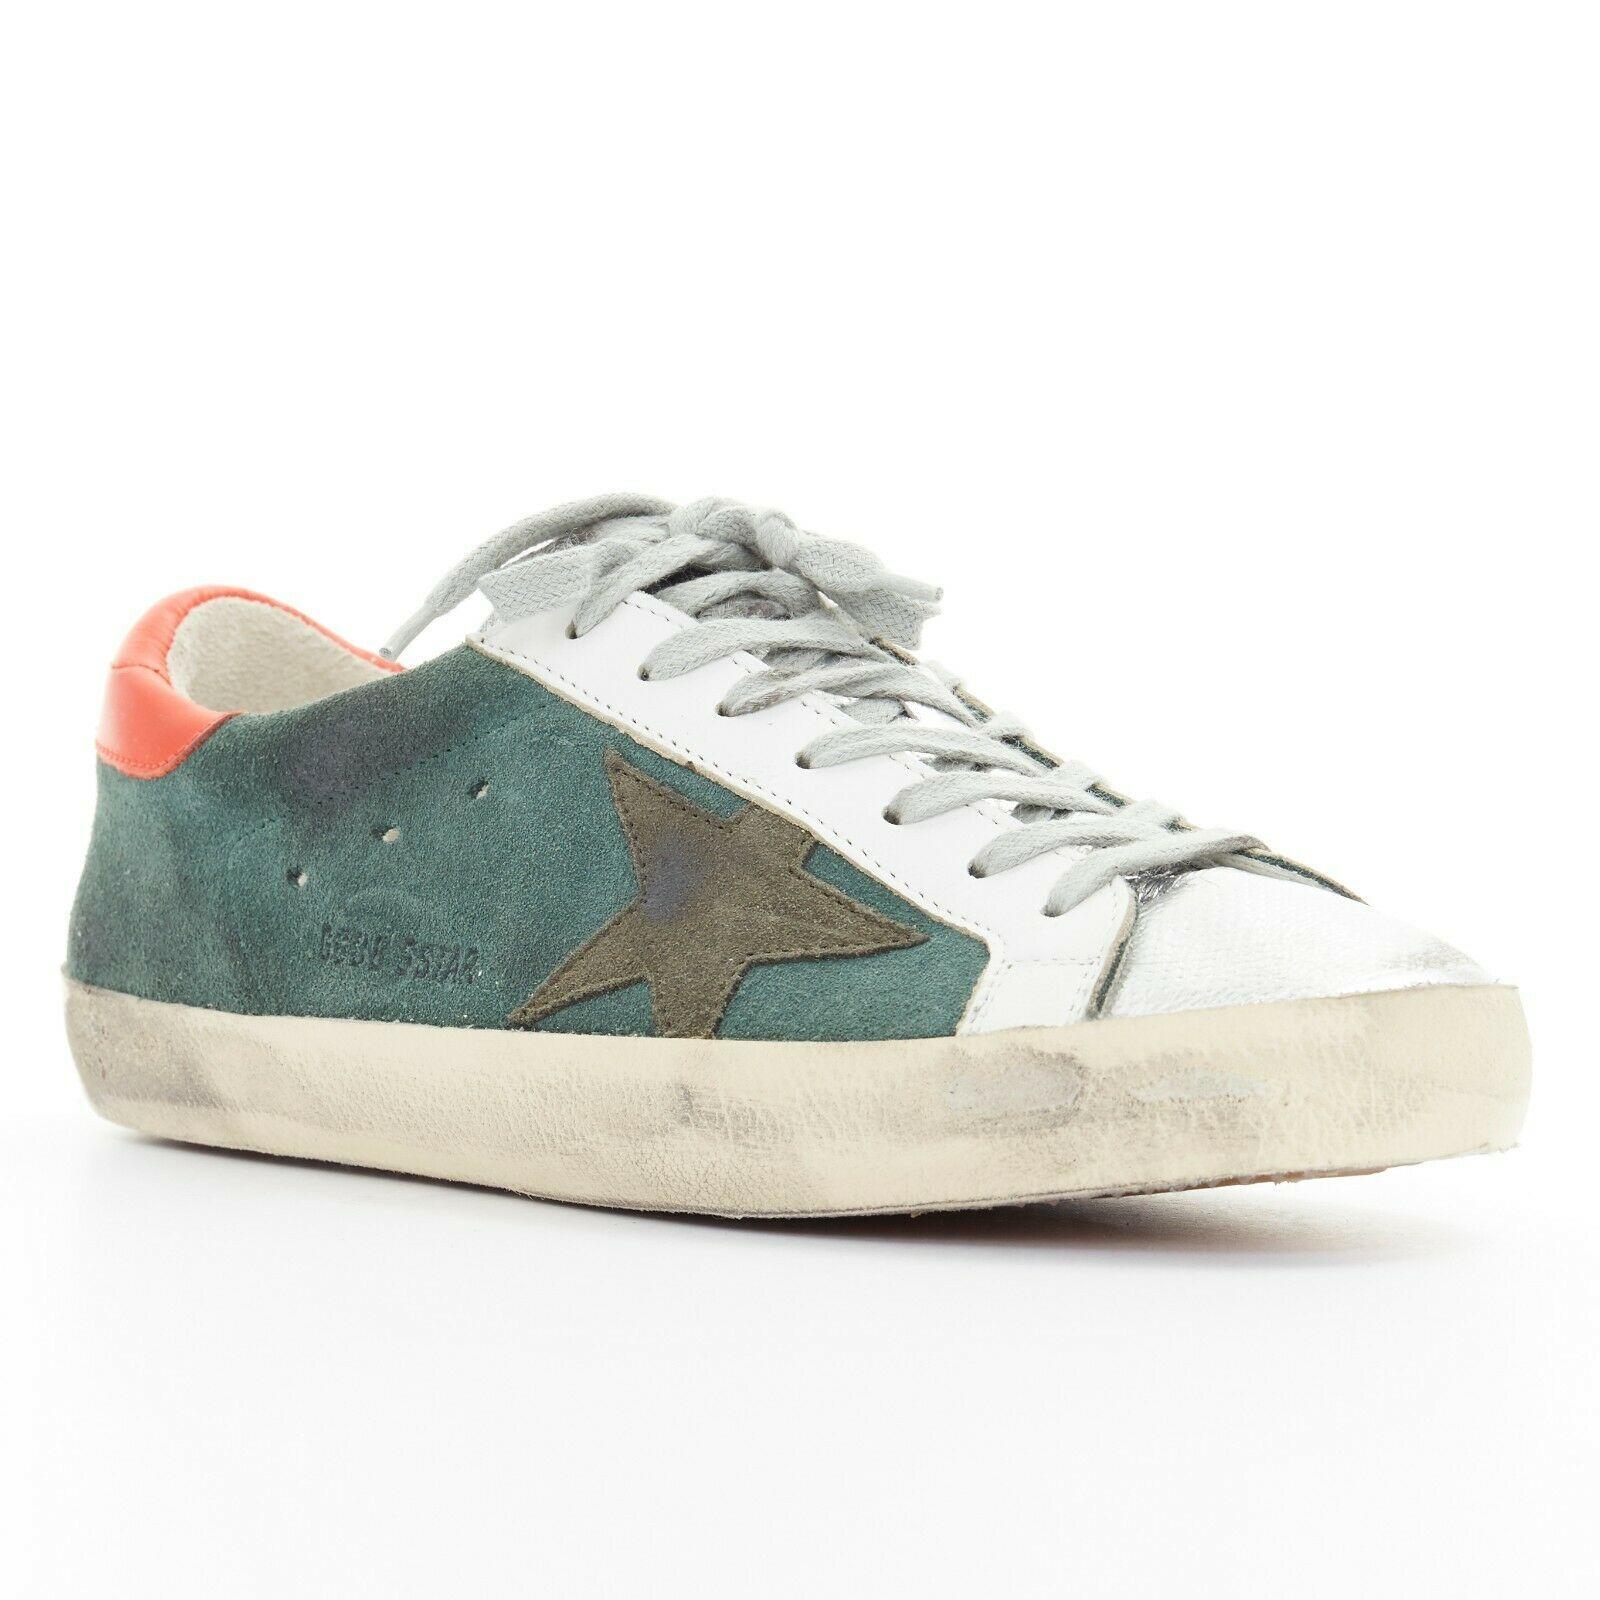 new GOLDEN GOOSE green suede silver toe distressed dirty lace up sneaker EU41
GOLDEN GOOSE
Distressed dirty style sneakers. Green/blue suede leather upper. Red leather detail at heel. 
Metallic silver leather at toe. Grey laces. Golden Goose